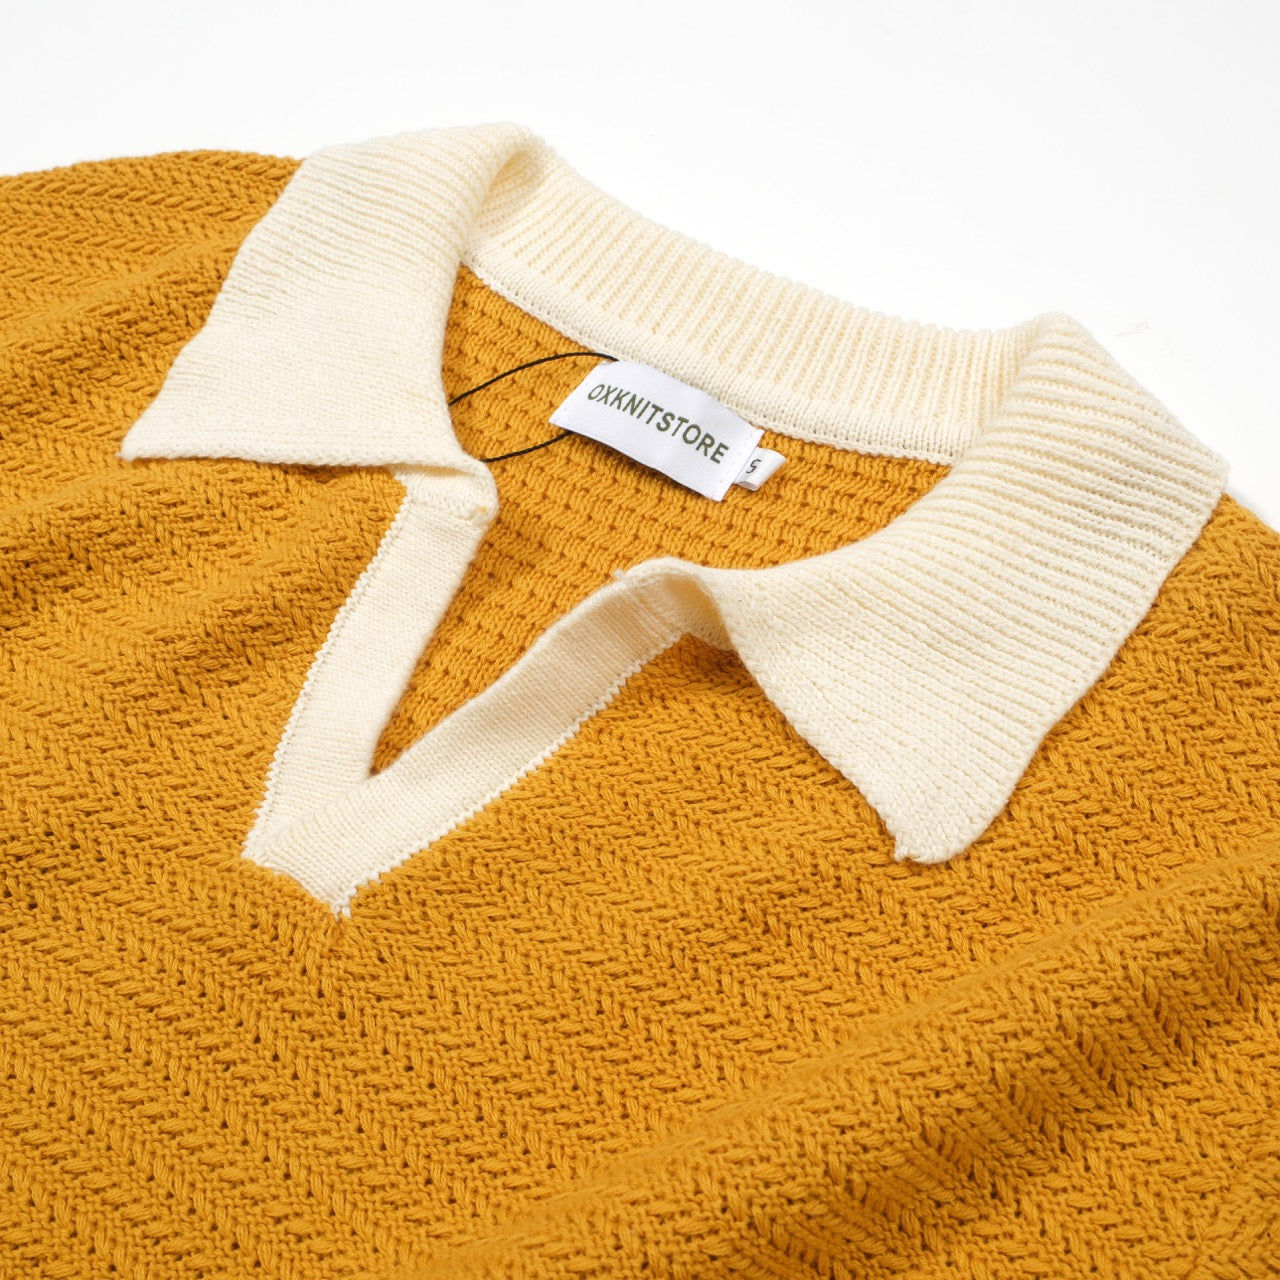 OXKNIT Men Vintage Clothing 1960s Mod Style Casual Orange Knitted V ...